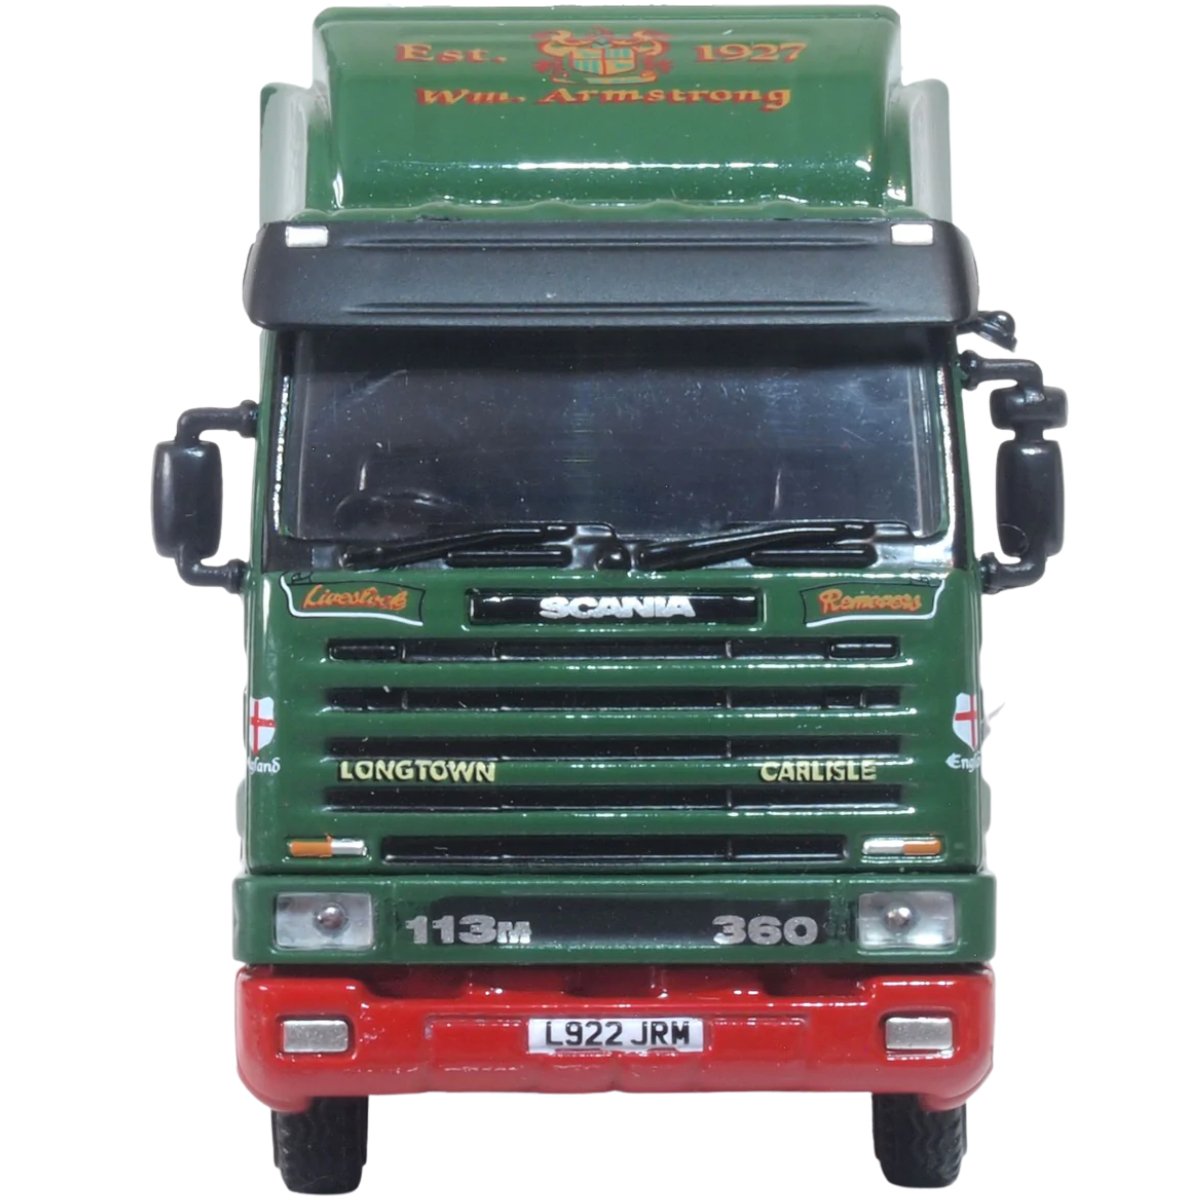 Oxford Diecast 76S143005 Scania 143 40ft Fridge Trailer William Armstrong - Phillips Hobbies